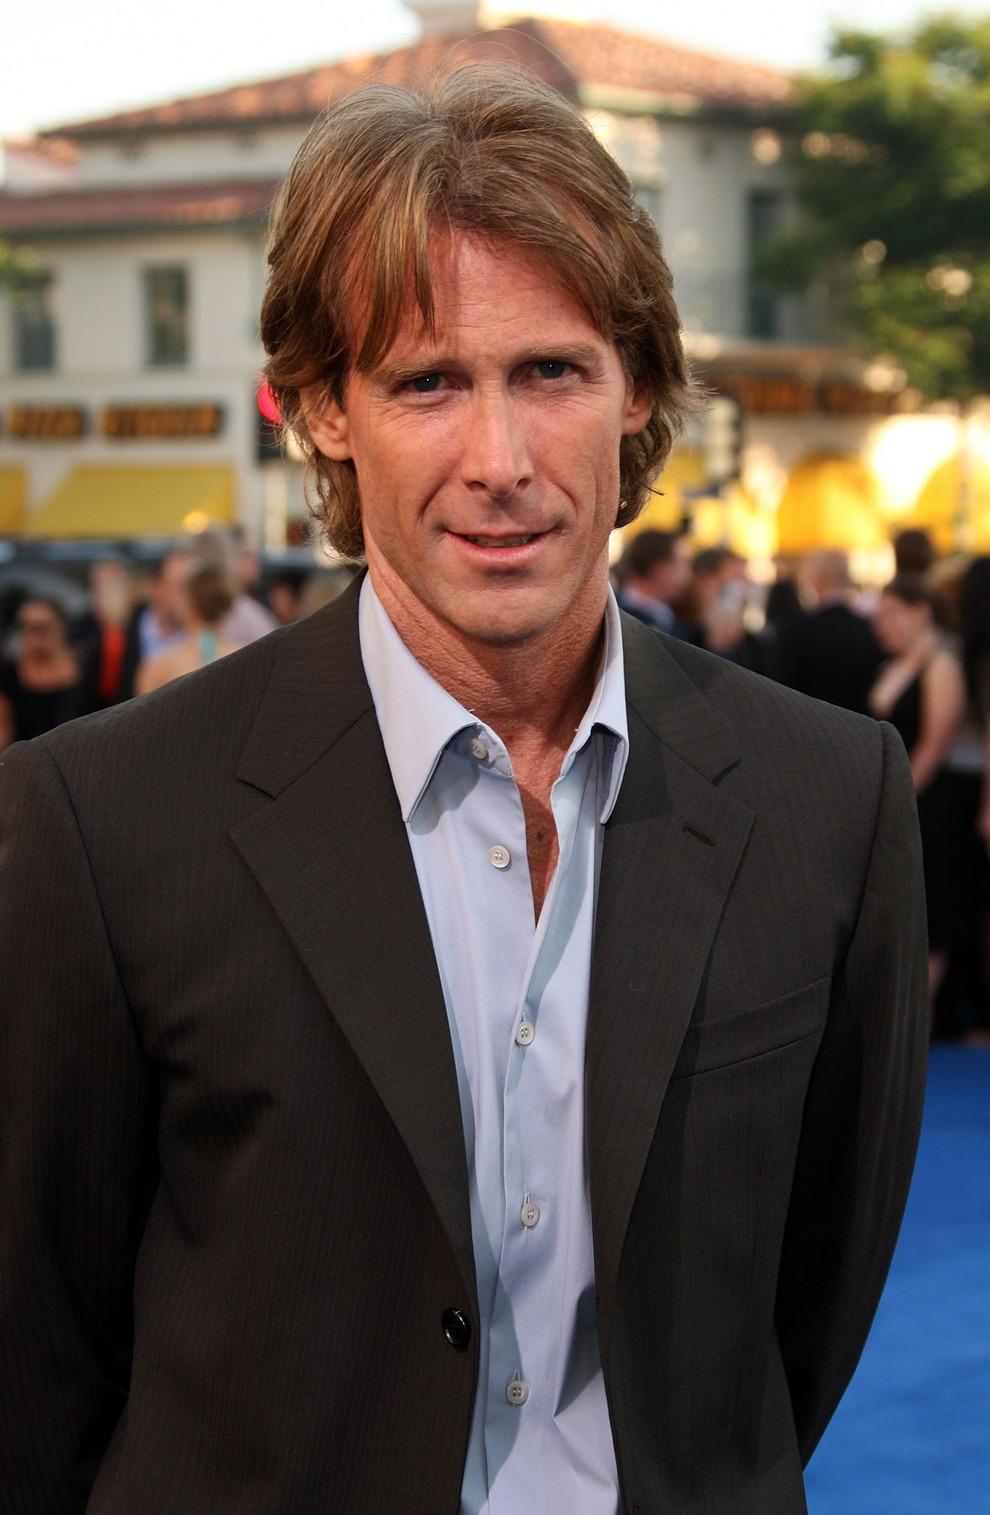 images-of-michael-bay